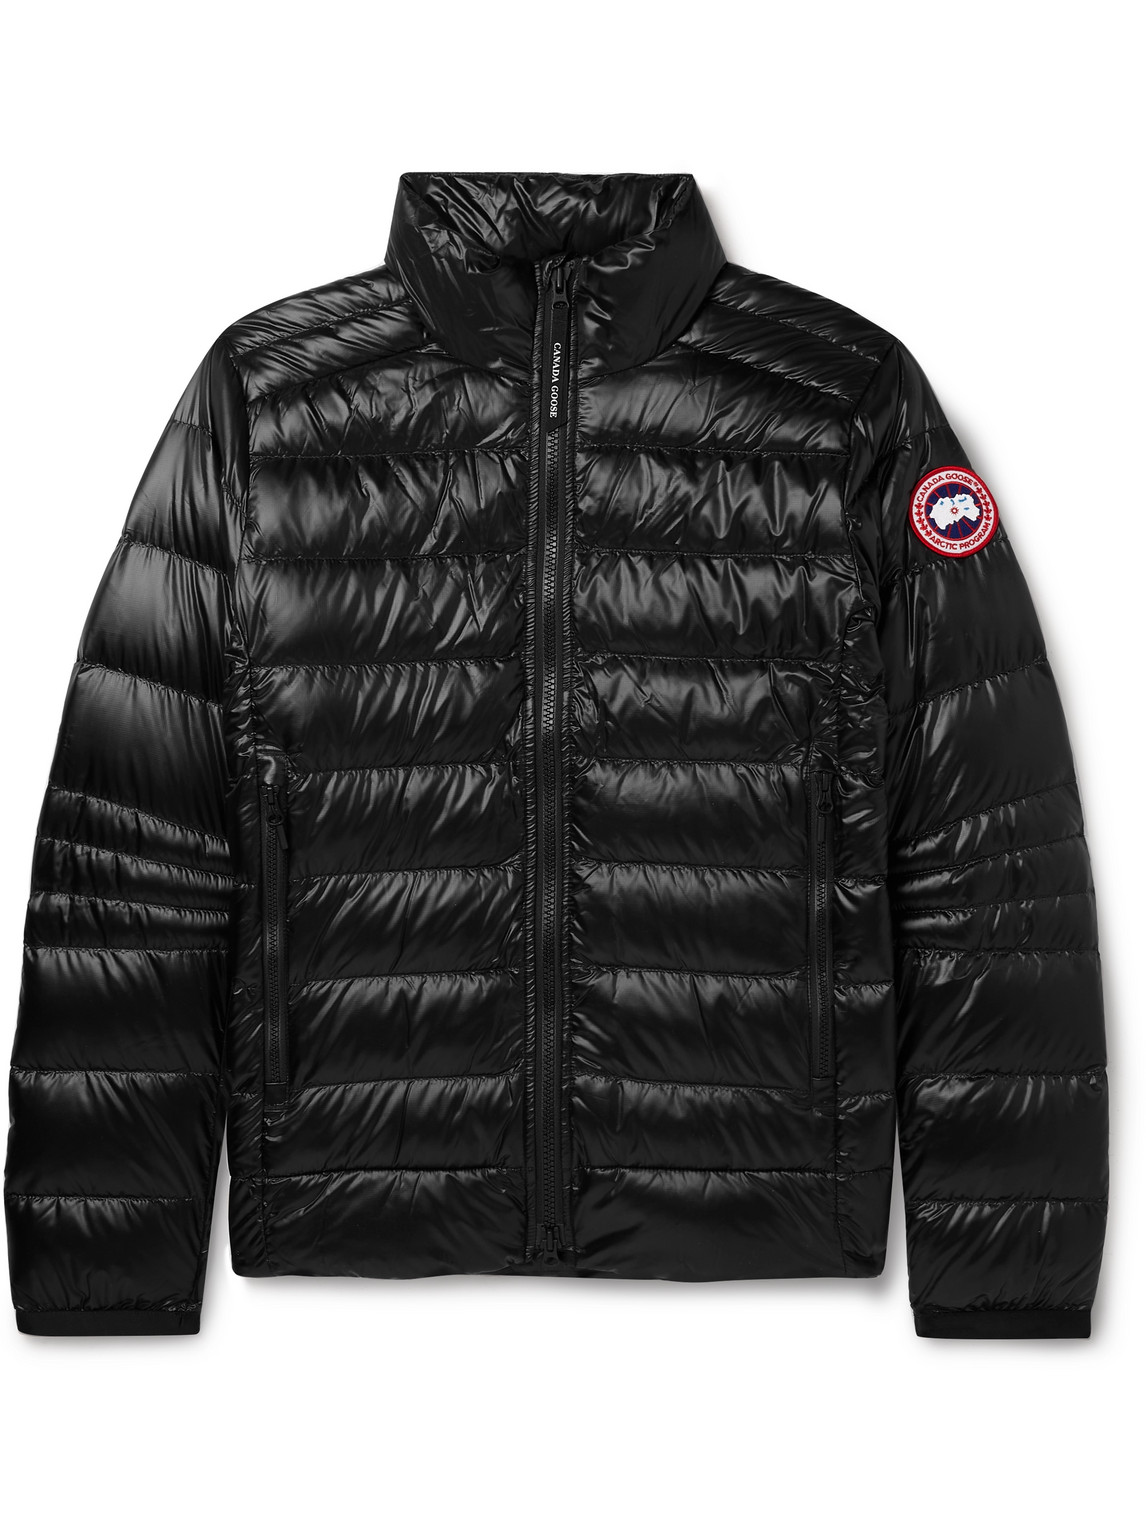 Canada Goose - Crofton Slim-Fit Quilted Recycled Nylon-Ripstop Down Jacket - Men - Black - XXL von Canada Goose